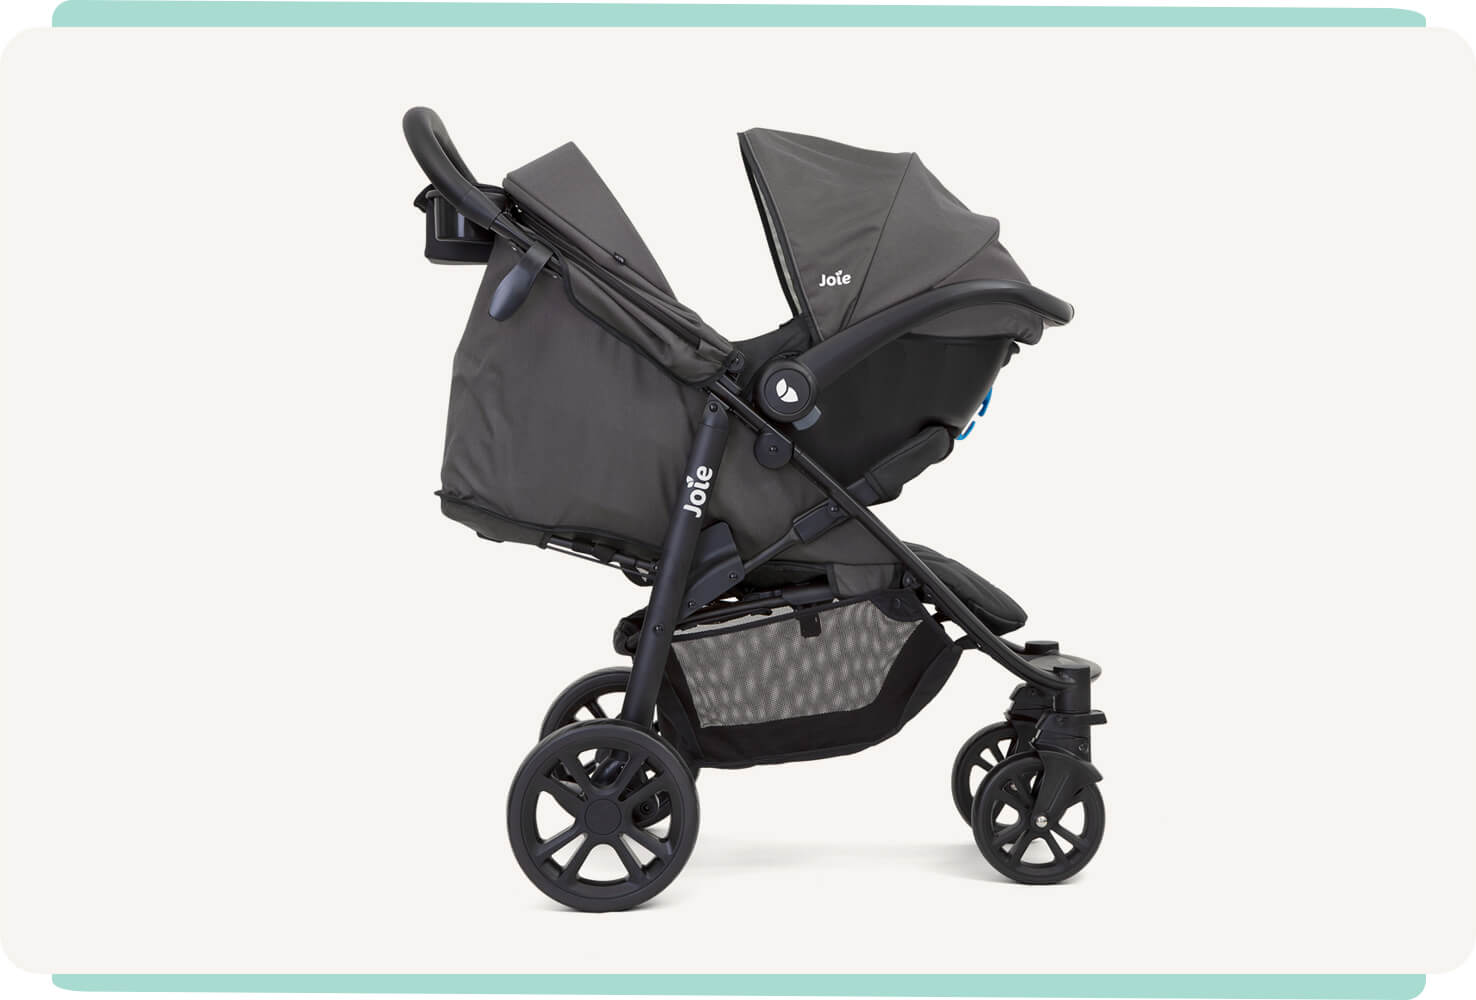 A black Joie Litetrax 4 travel system with the infant car seat attached to the stroller, facing toward the right in profile.